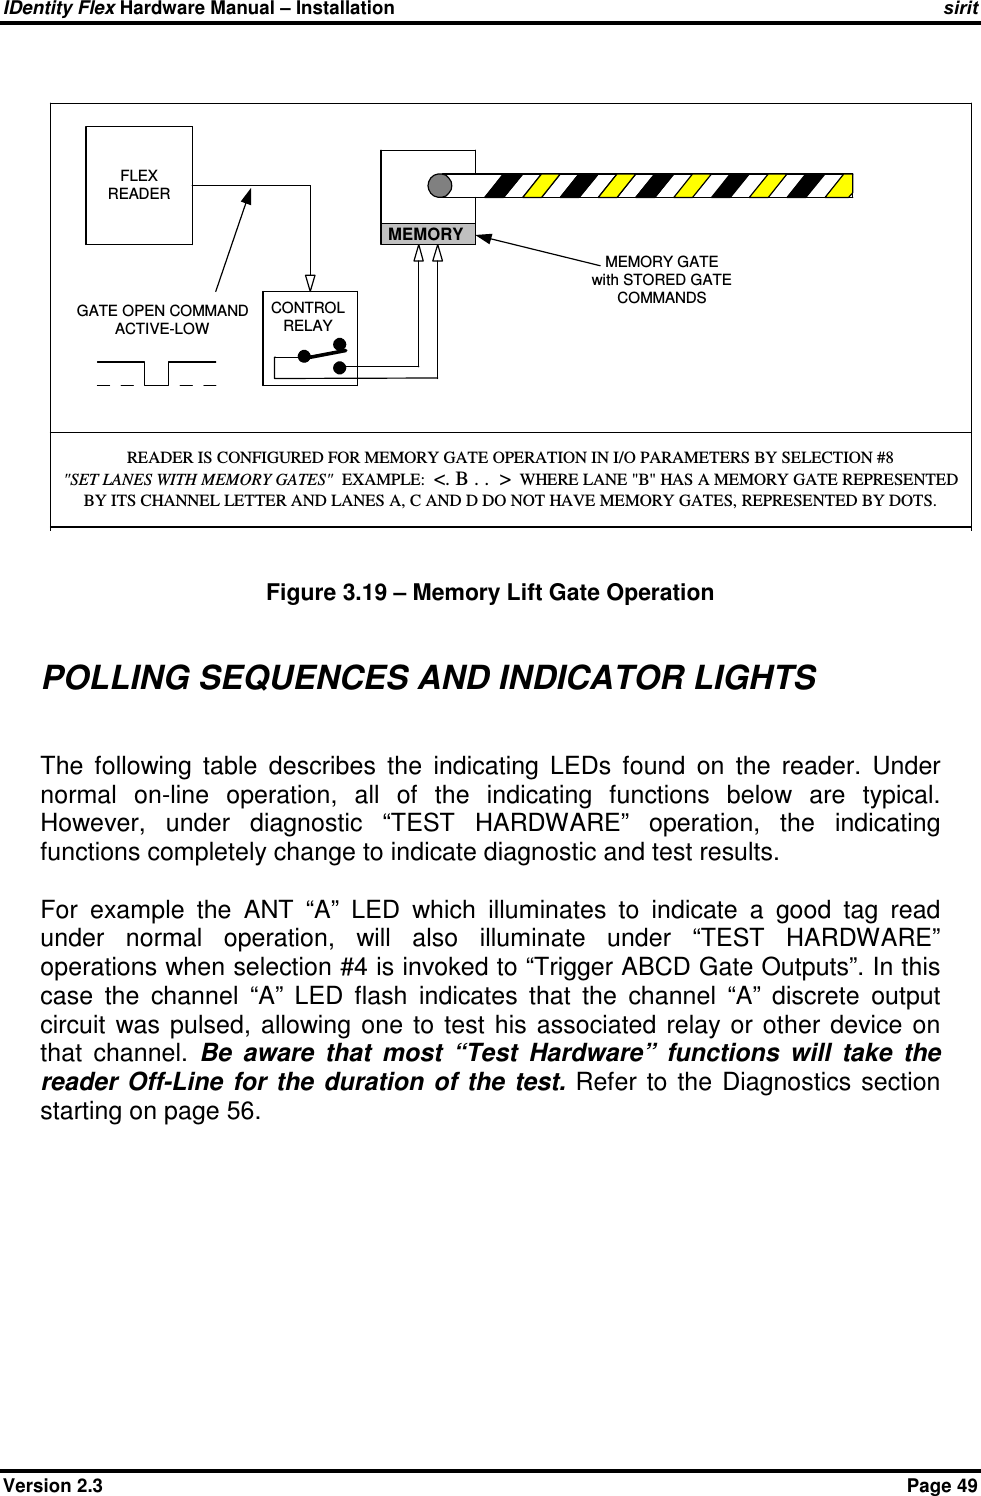 IDentity Flex Hardware Manual – Installation   sirit Version 2.3    Page 49  Figure 3.19 – Memory Lift Gate Operation  POLLING SEQUENCES AND INDICATOR LIGHTS  The  following  table  describes  the  indicating  LEDs  found  on  the  reader.  Under normal  on-line  operation,  all  of  the  indicating  functions  below  are  typical. However,  under  diagnostic  “TEST  HARDWARE”  operation,  the  indicating functions completely change to indicate diagnostic and test results.   For  example  the  ANT  “A”  LED  which  illuminates  to  indicate  a  good  tag  read under  normal  operation,  will  also  illuminate  under  “TEST  HARDWARE” operations when selection #4 is invoked to “Trigger ABCD Gate Outputs”. In this case  the  channel  “A”  LED  flash  indicates  that  the  channel  “A”  discrete  output circuit  was  pulsed,  allowing  one  to  test  his  associated  relay  or other  device  on that  channel.  Be  aware  that  most  “Test  Hardware”  functions  will  take  the reader  Off-Line  for the  duration  of  the test.  Refer  to  the Diagnostics  section starting on page 56. MEMORY GATEwith STORED GATECOMMANDSFLEXREADERGATE OPEN COMMANDACTIVE-LOWREADER IS CONFIGURED FOR MEMORY GATE OPERATION IN I/O PARAMETERS BY SELECTION #8&quot;SET LANES WITH MEMORY GATES&quot;  EXAMPLE:  &lt;. B . .  &gt;  WHERE LANE &quot;B&quot; HAS A MEMORY GATE REPRESENTEDBY ITS CHANNEL LETTER AND LANES A, C AND D DO NOT HAVE MEMORY GATES, REPRESENTED BY DOTS.CONTROLRELAYMEMORY